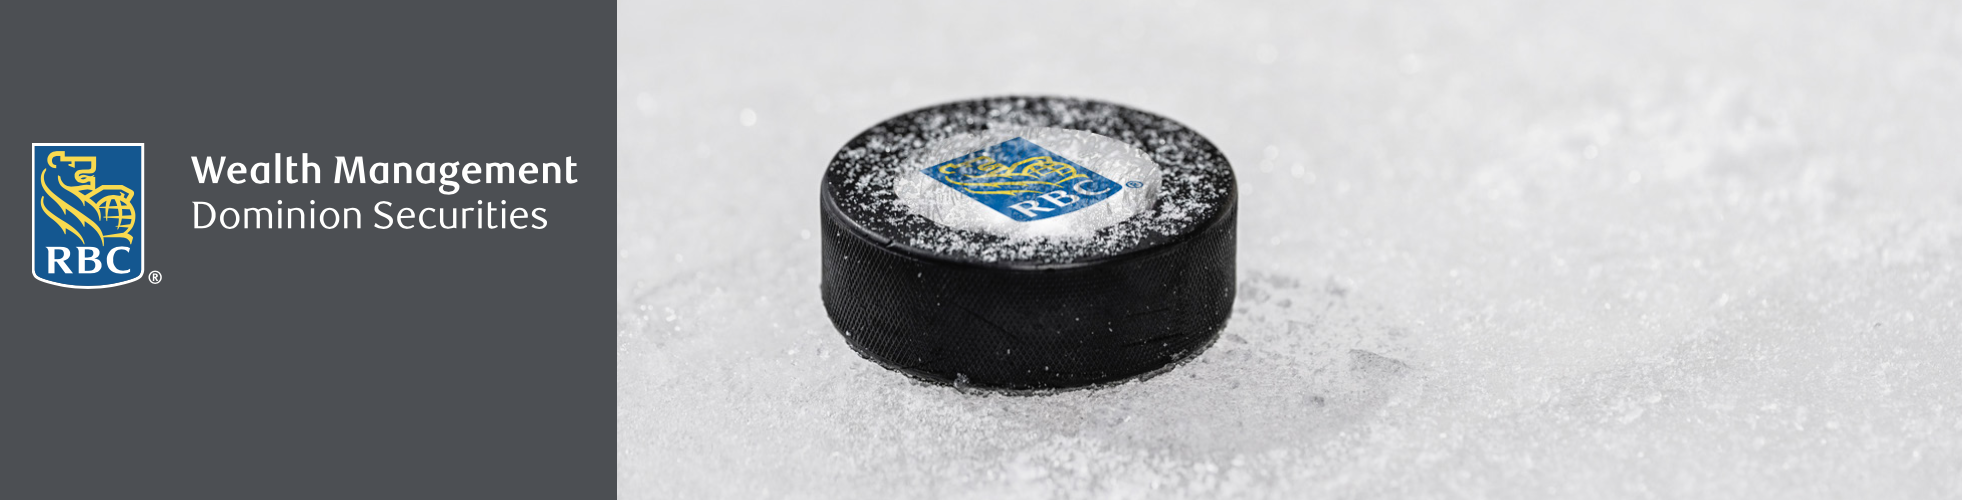 RBC Dominion Securities puck in page